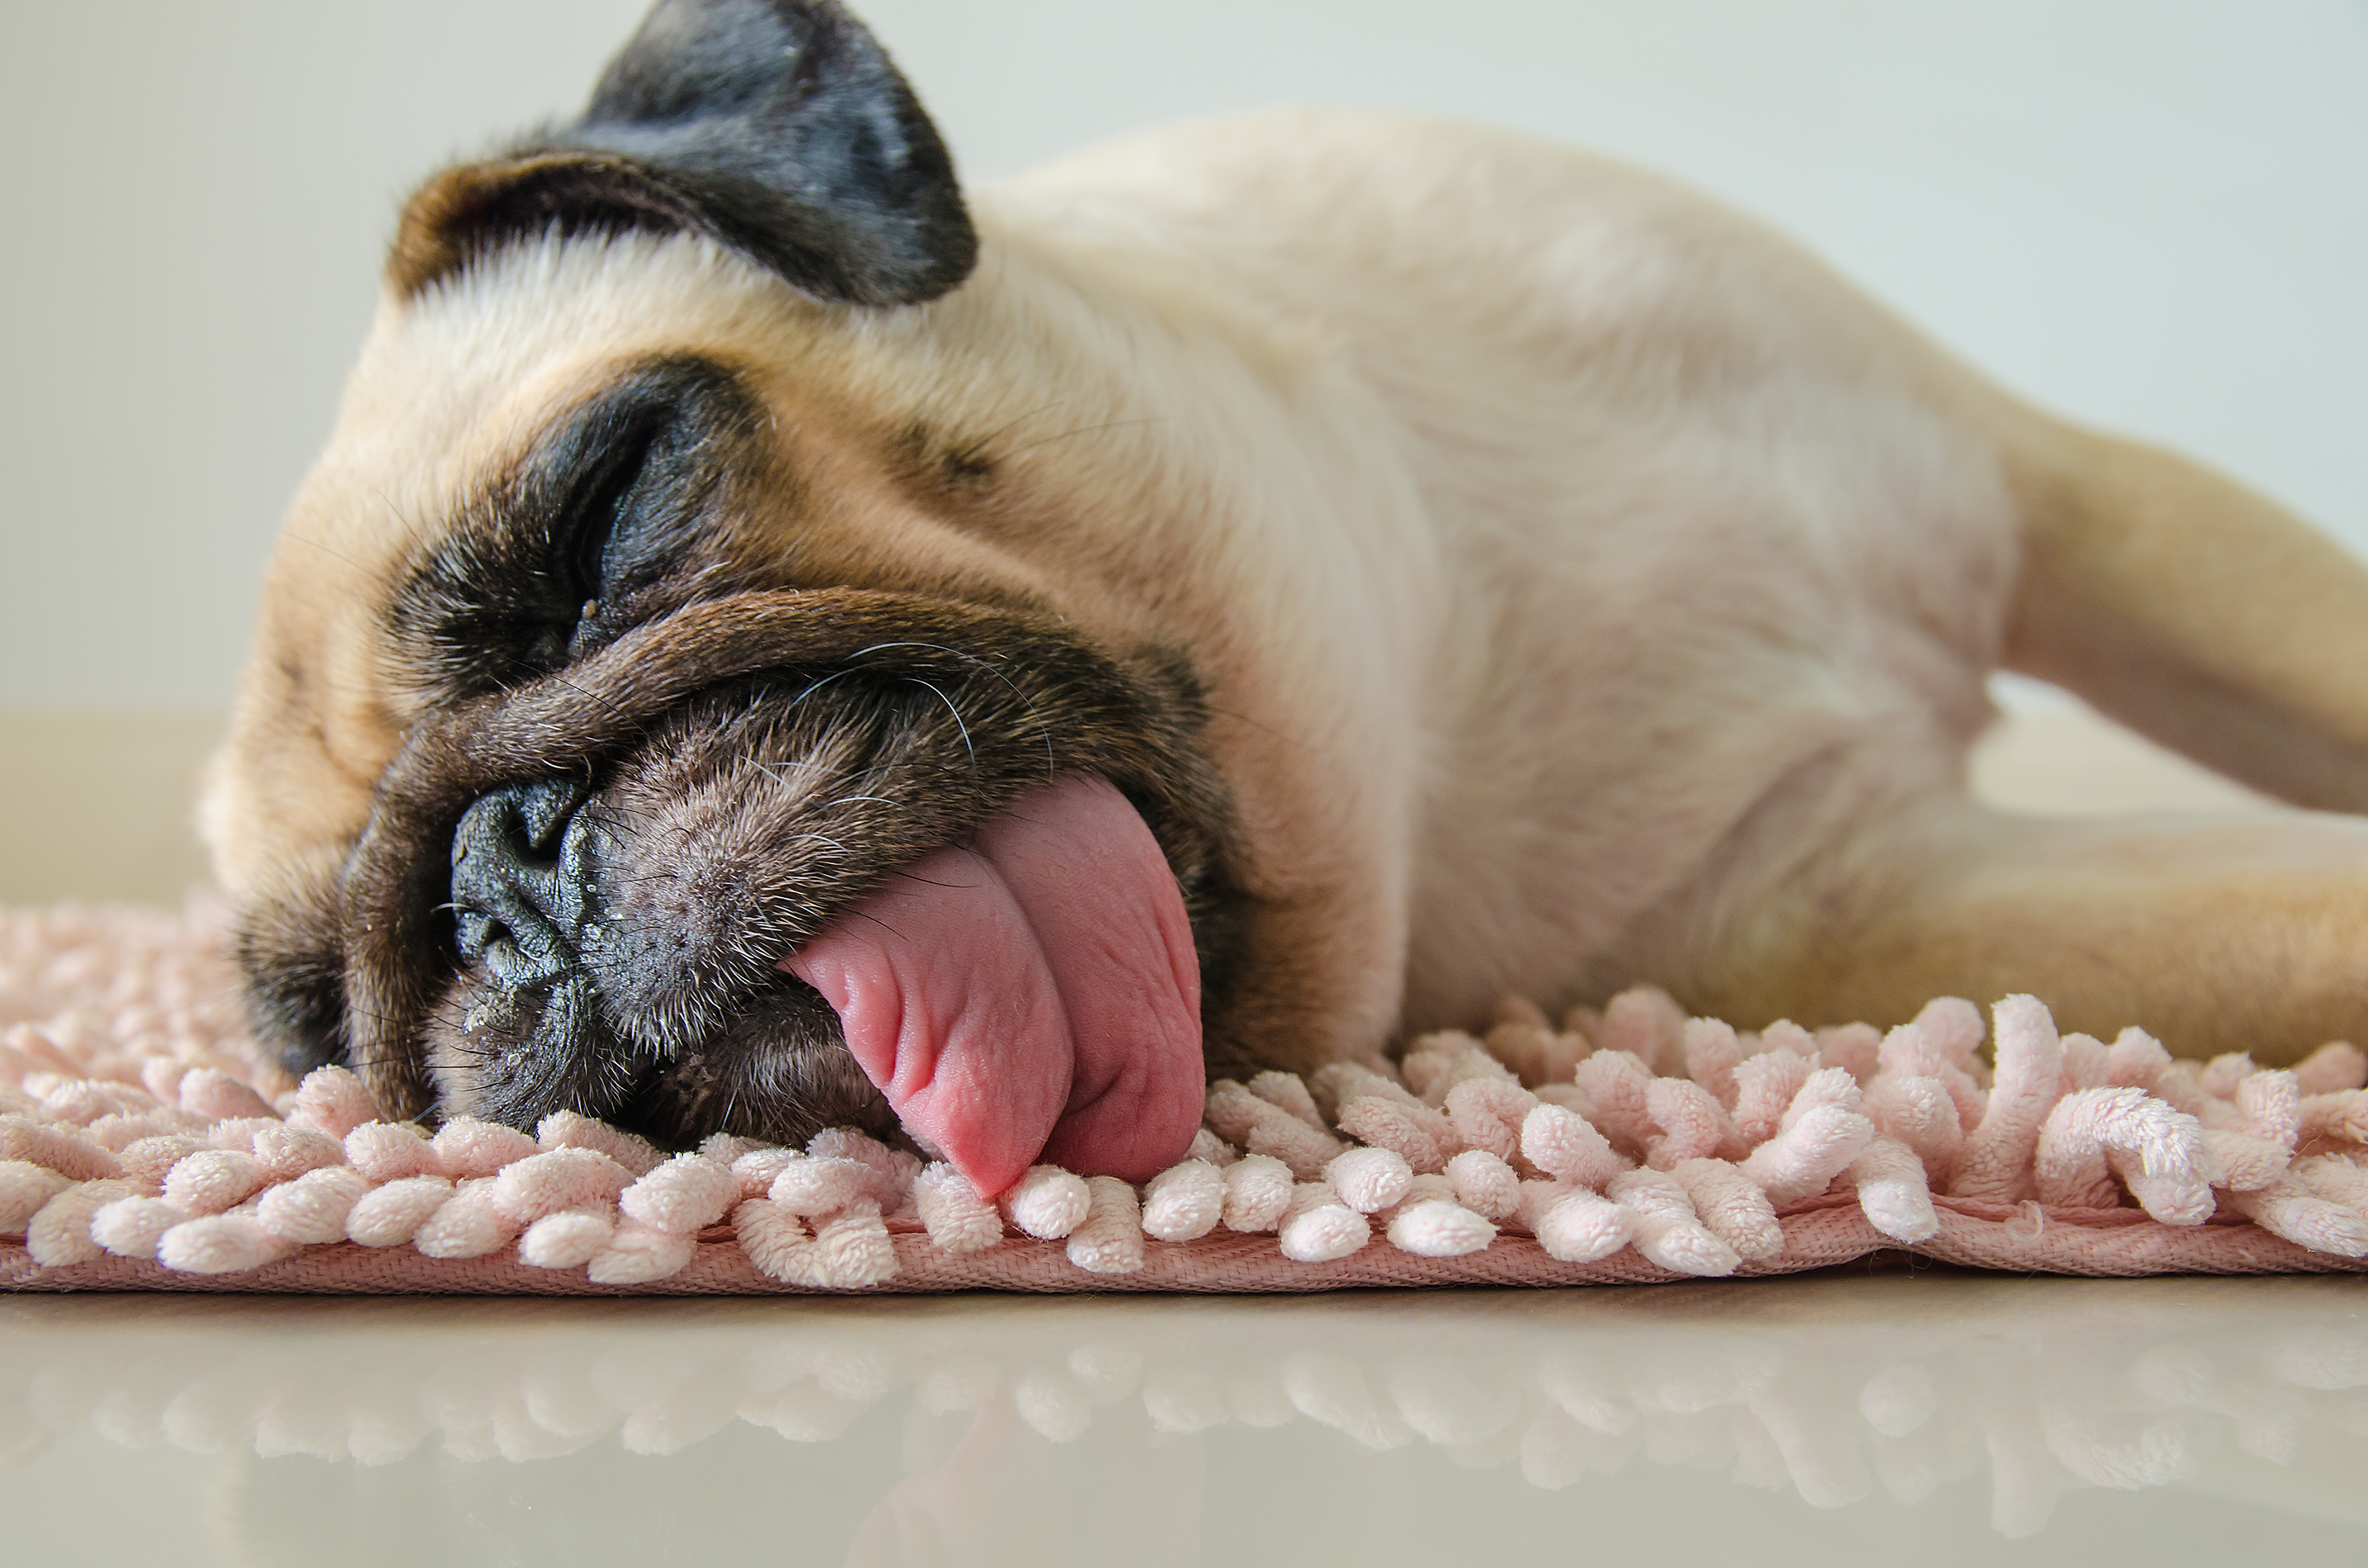 a pug lying on a pink bath mat asleep with its tongue out